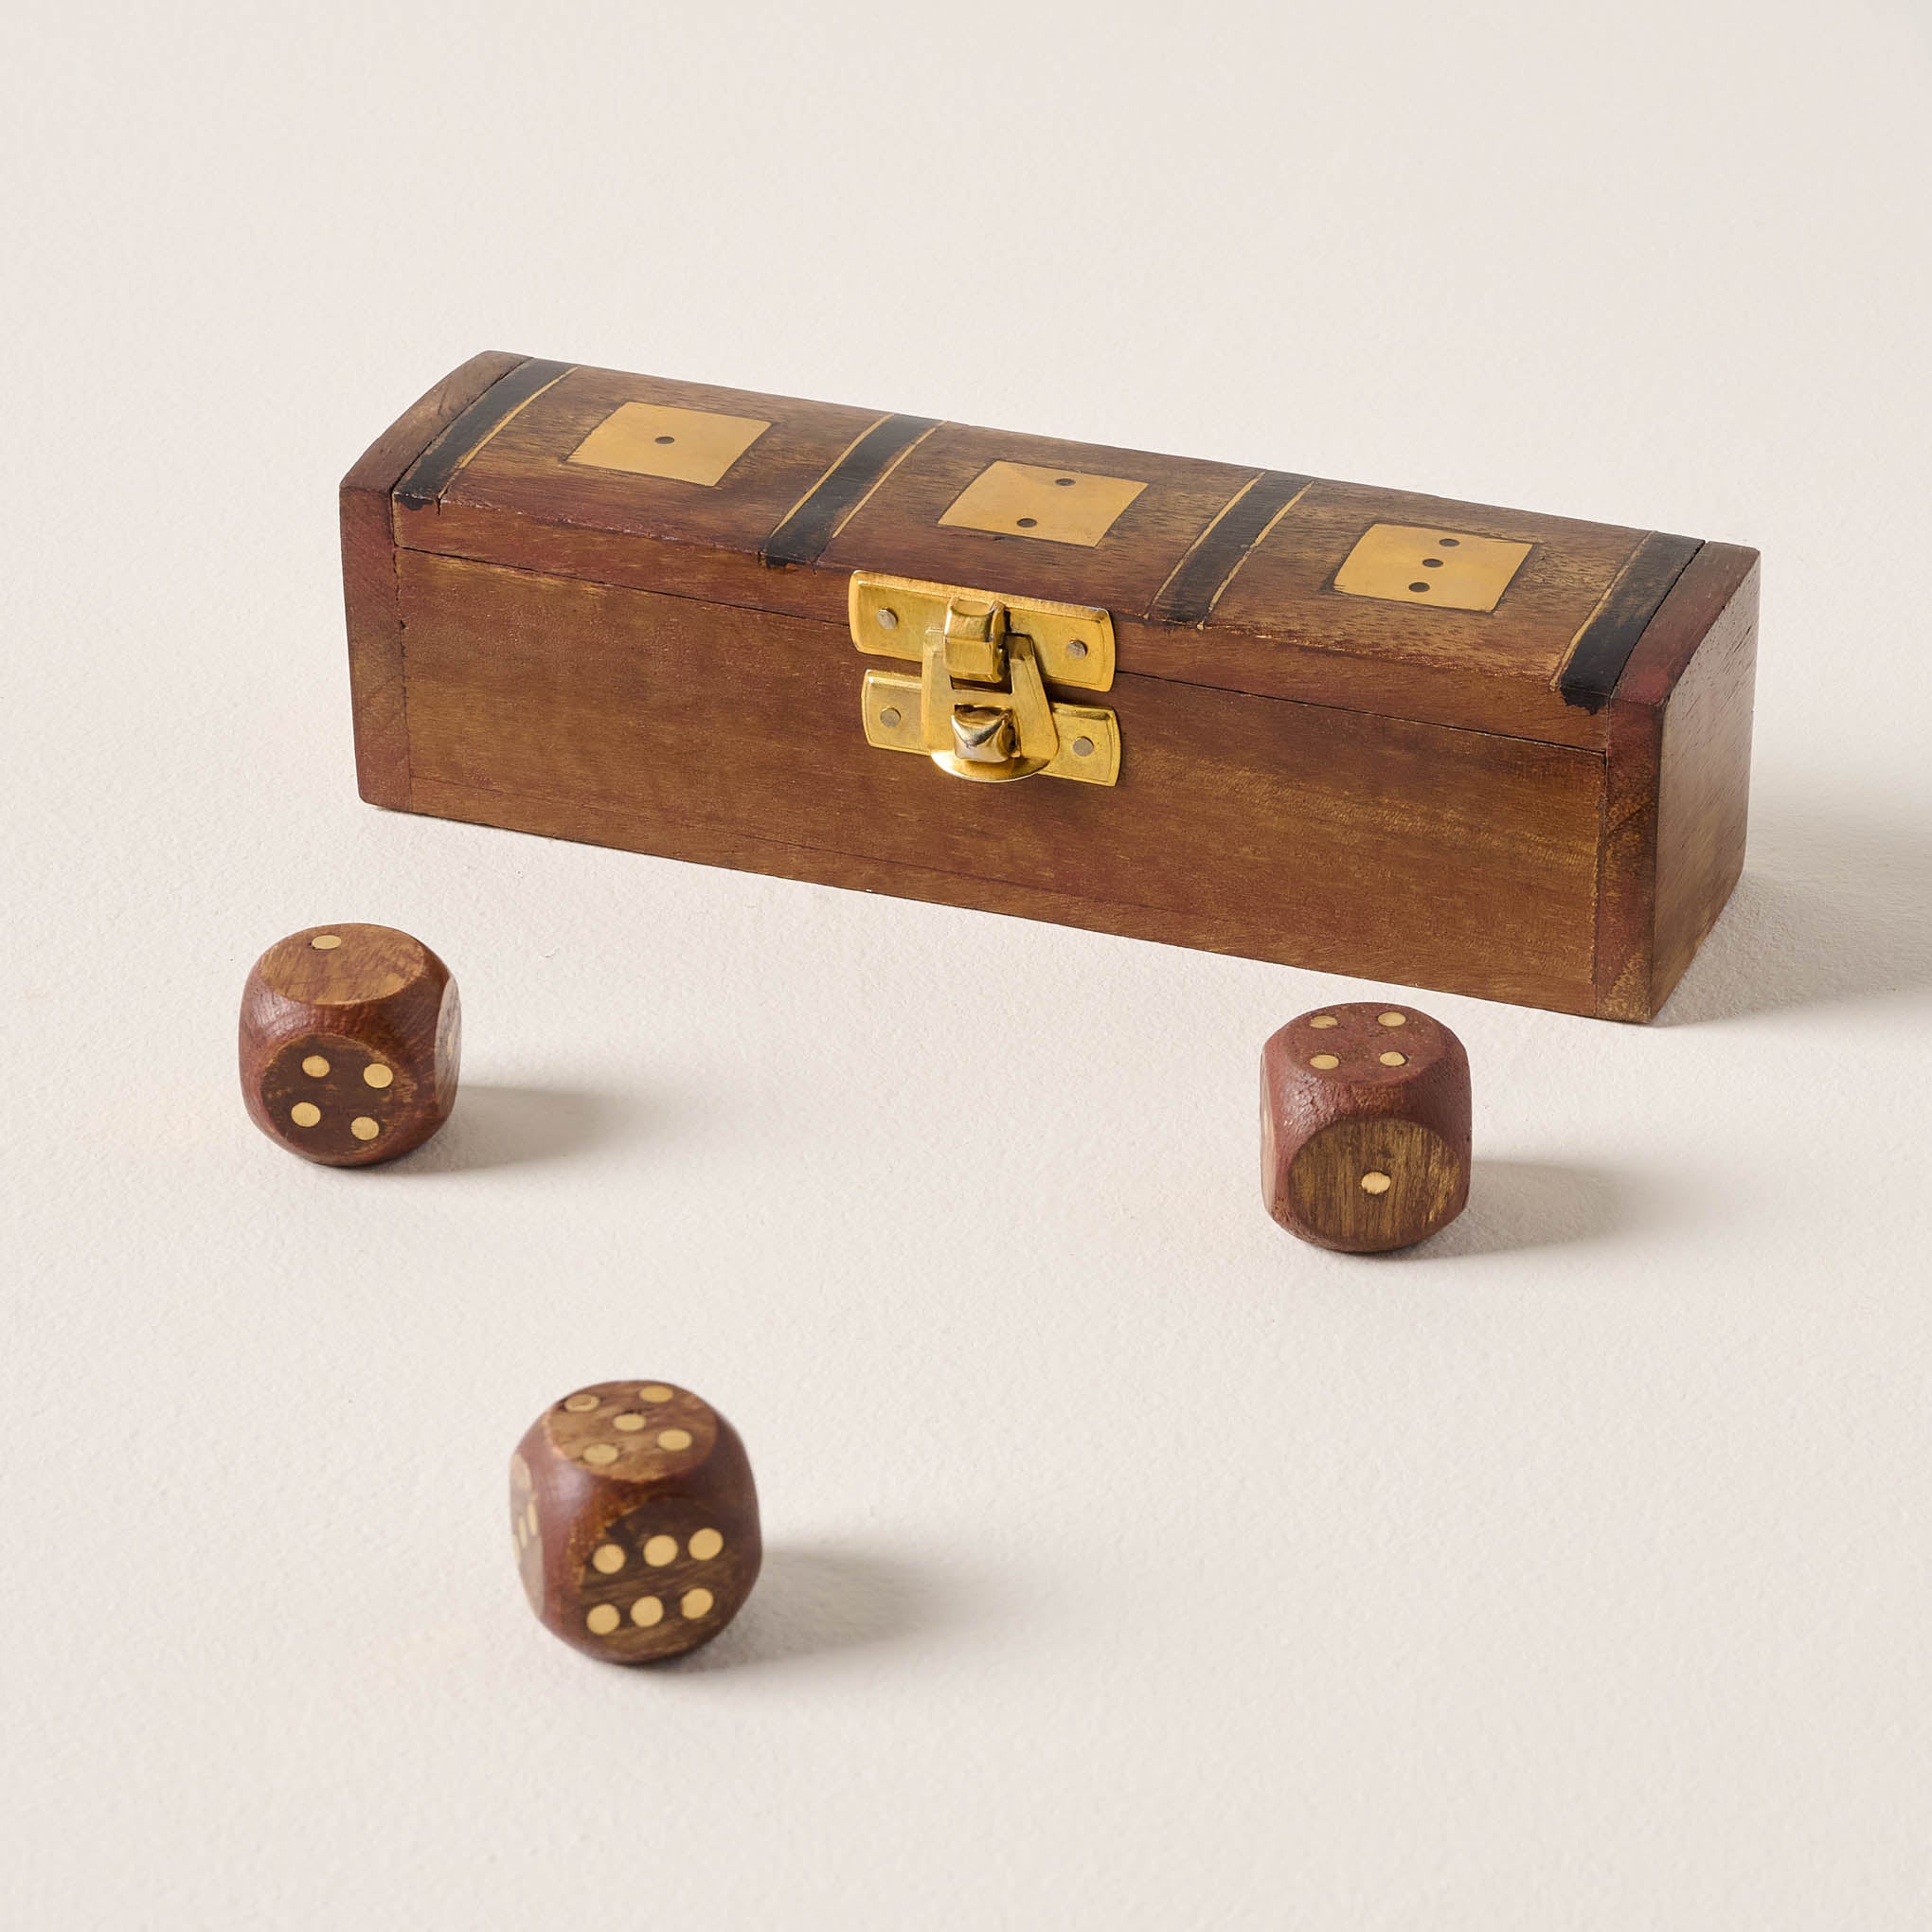 Gold Inlay Dice Case with dice out of the box